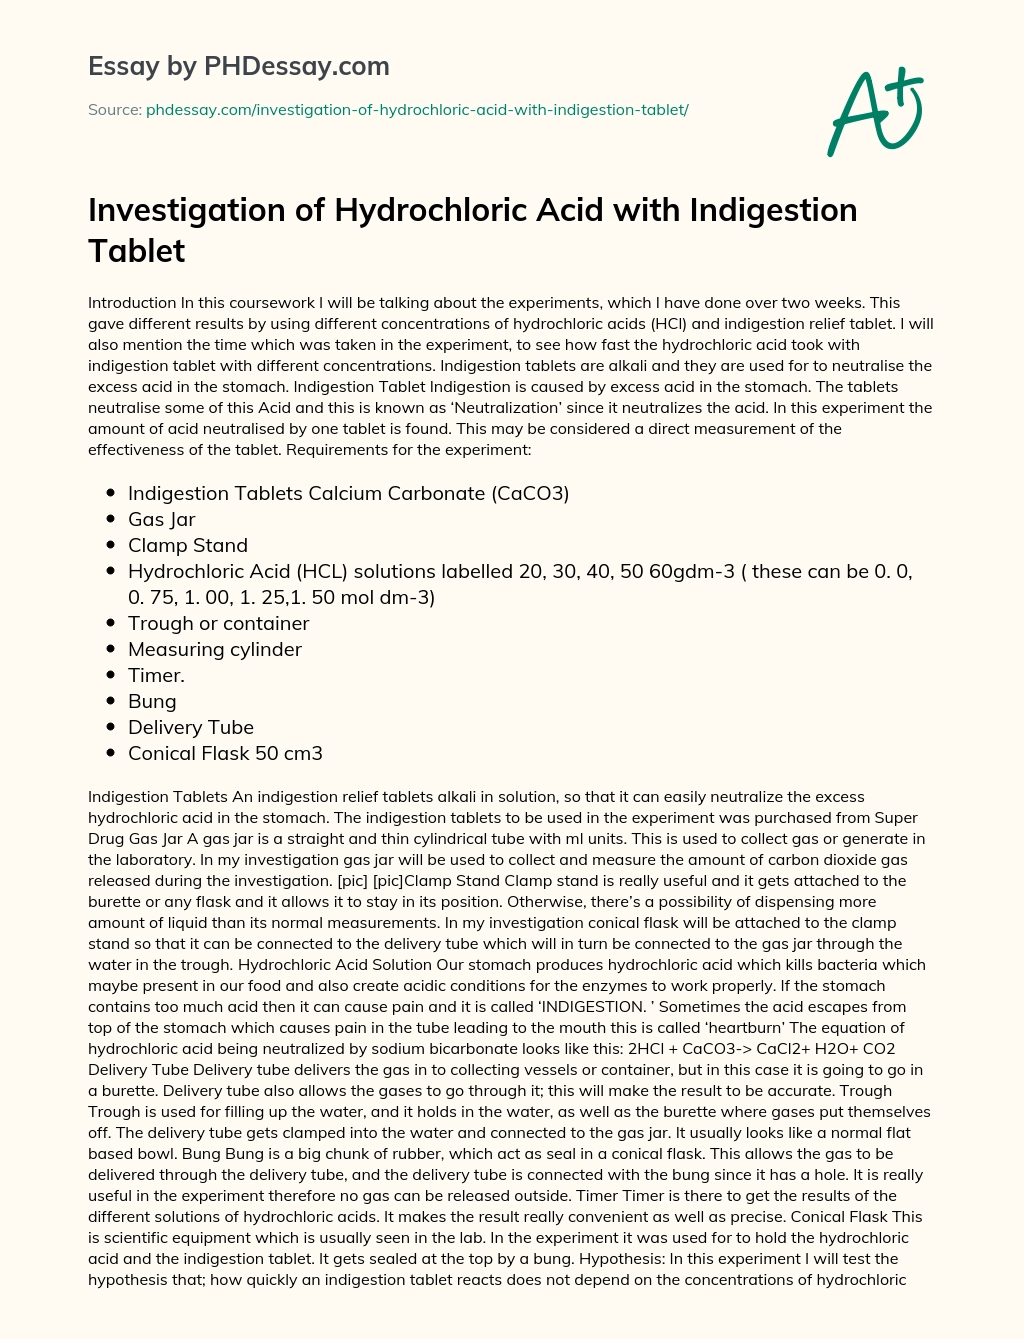 Investigation of Hydrochloric Acid with Indigestion Tablet essay